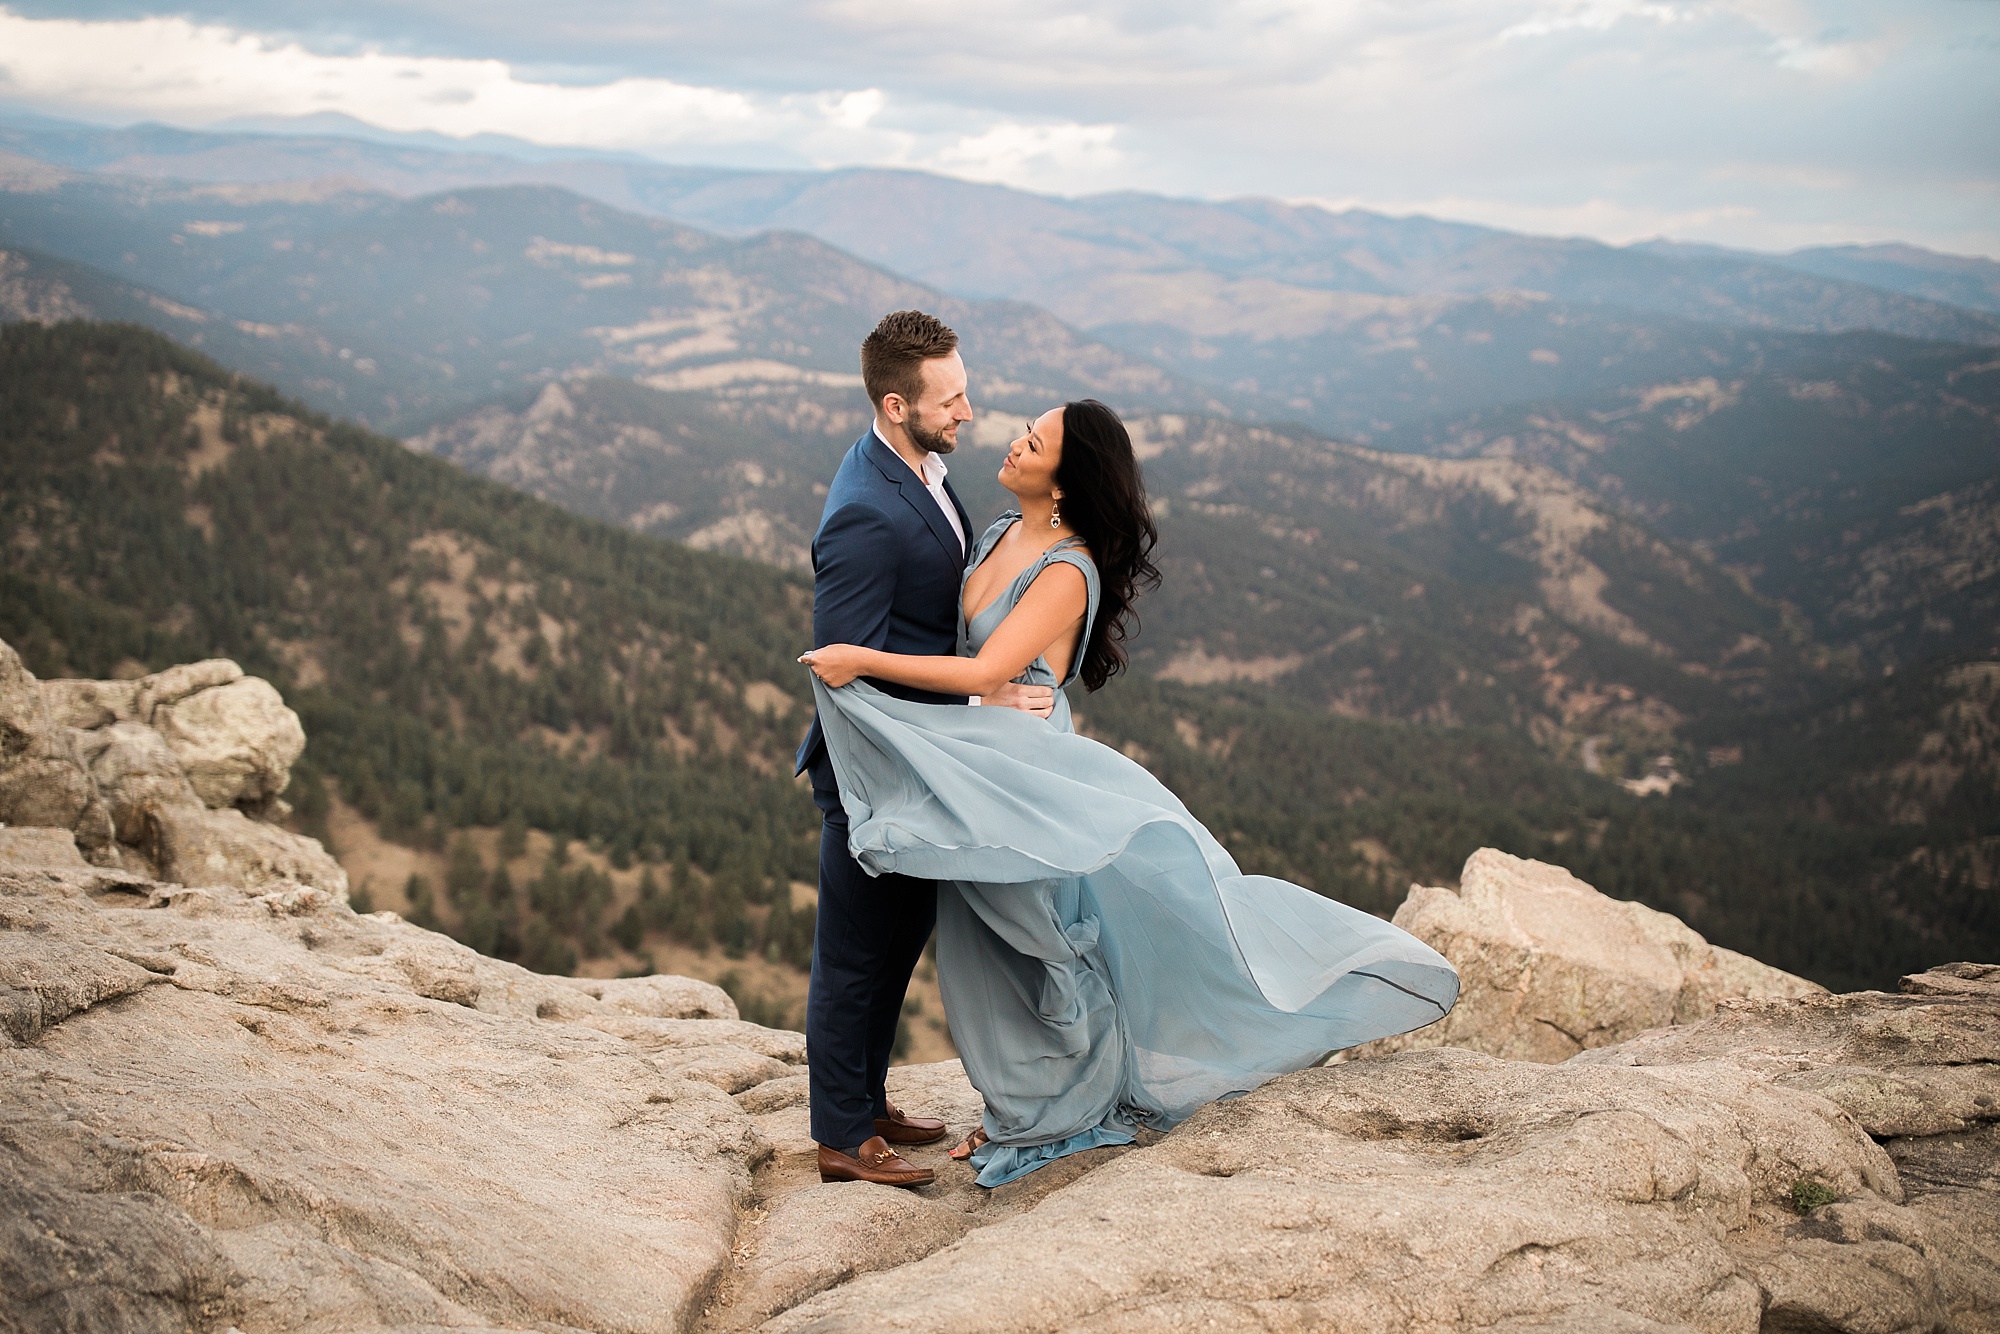 tiffany ian boulder engagement session colorado wedding lost gulch overlook hazel and lace photography